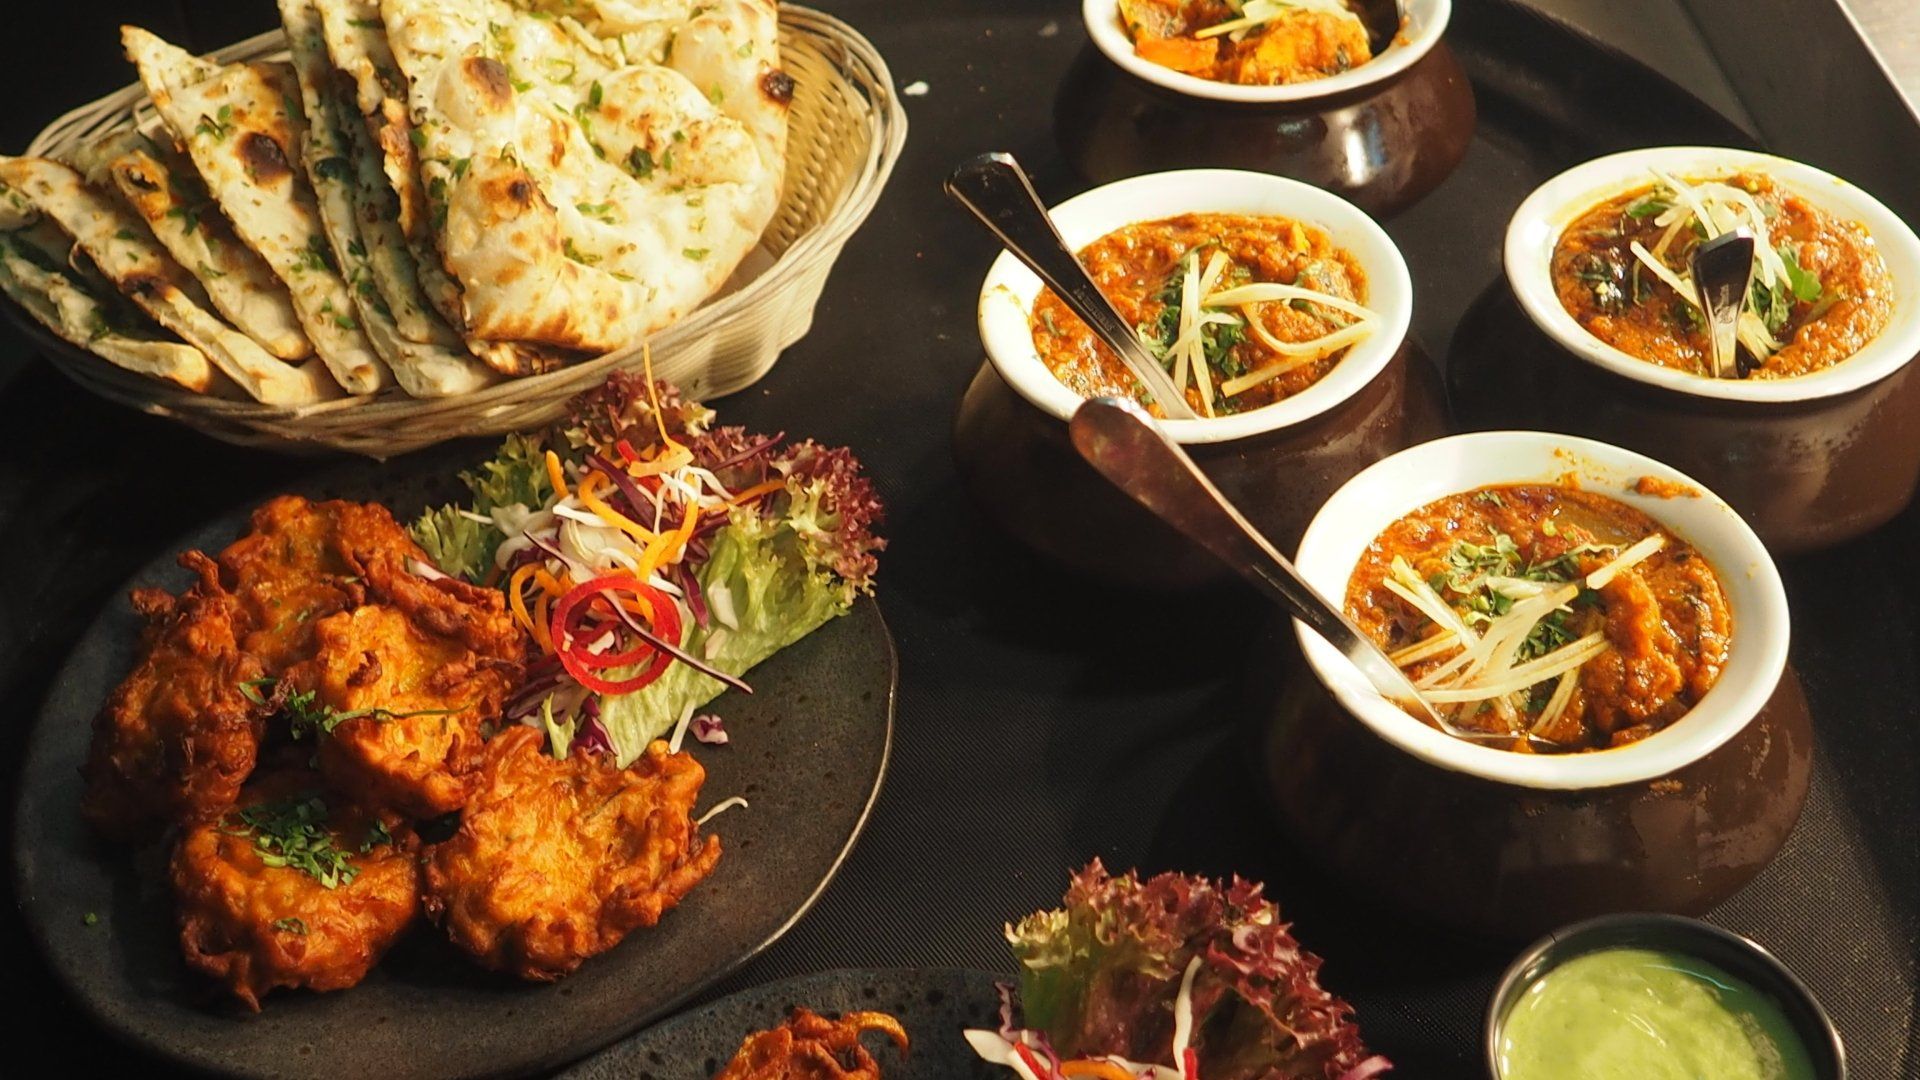 An image of several different types of food including curry, noodles, vegetables, chicken and naan bread. All of the food is either in white bowls and plates and are laid on a ceramic black worktop.